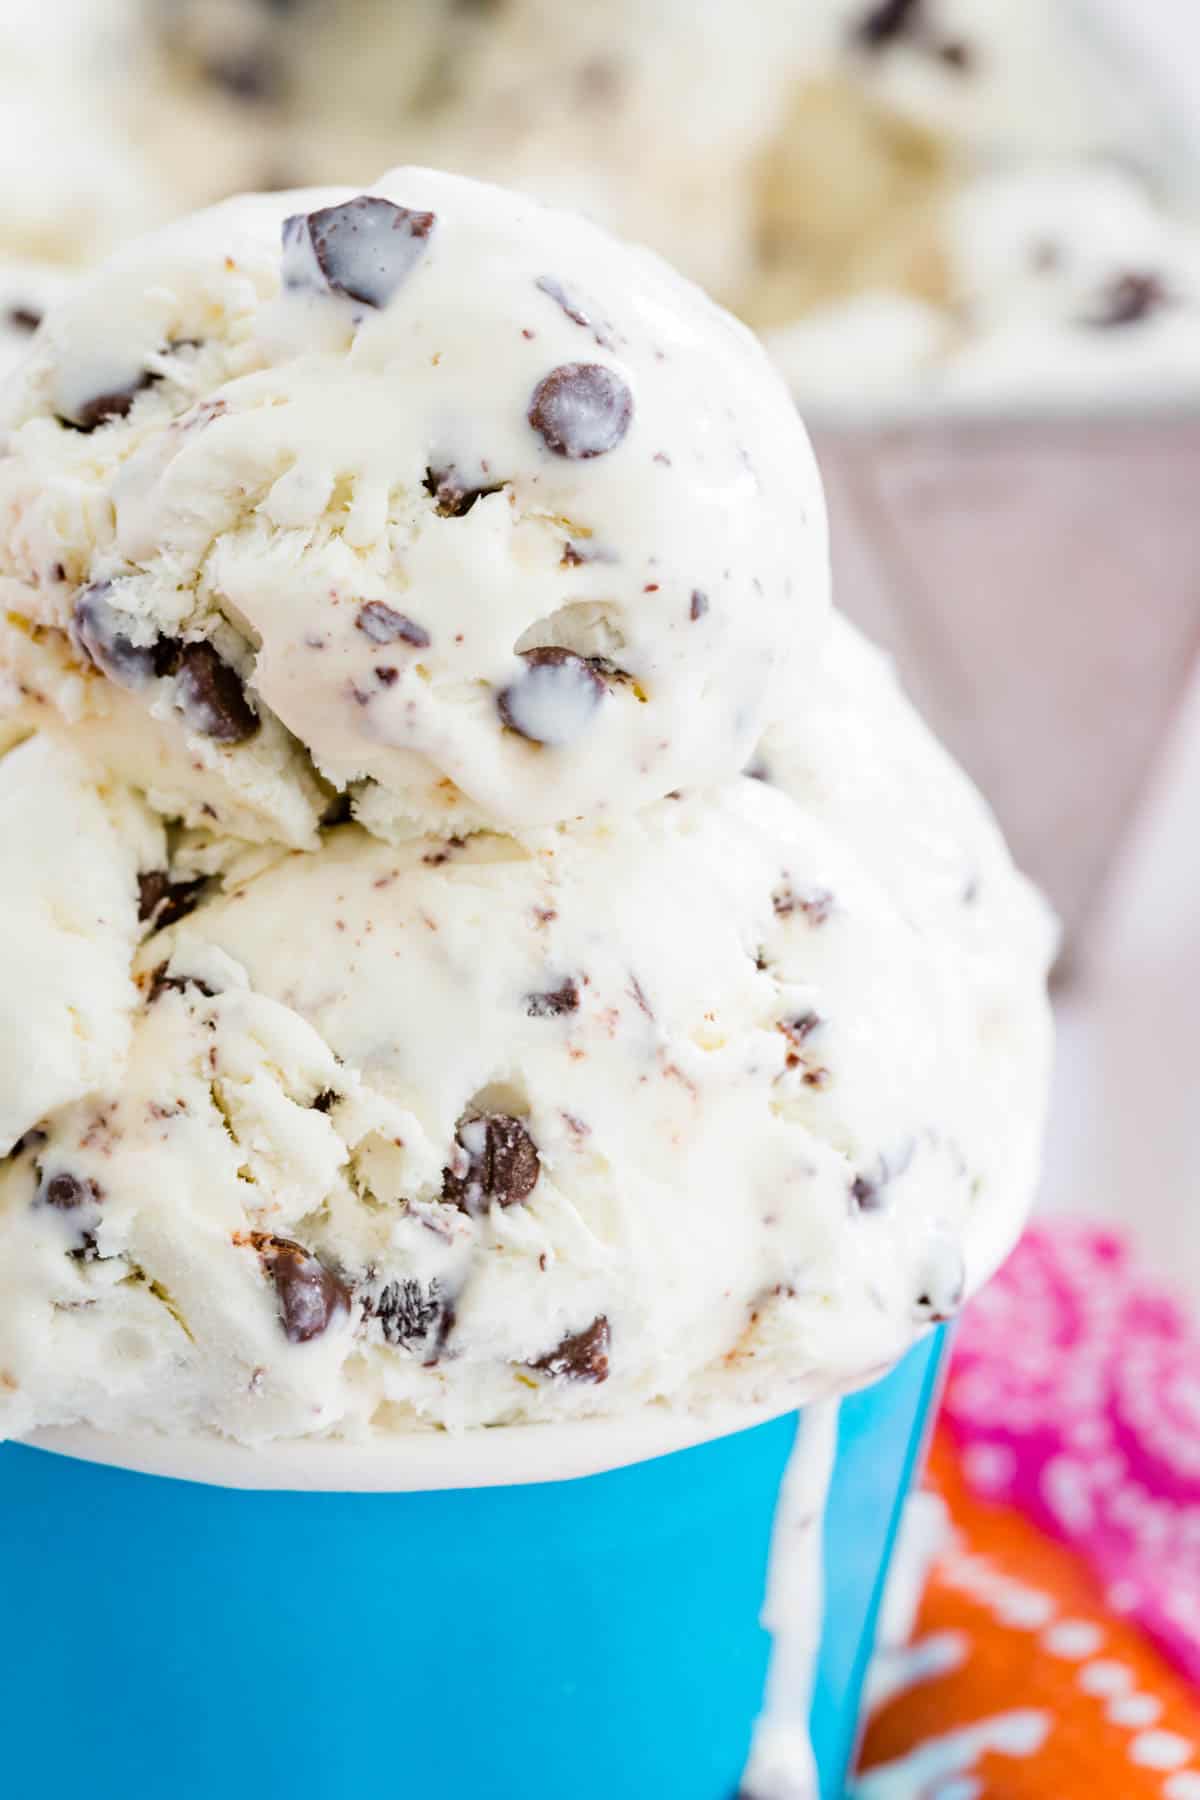 A close up shot of no churn chocolate chip ice cream in a blue cup.